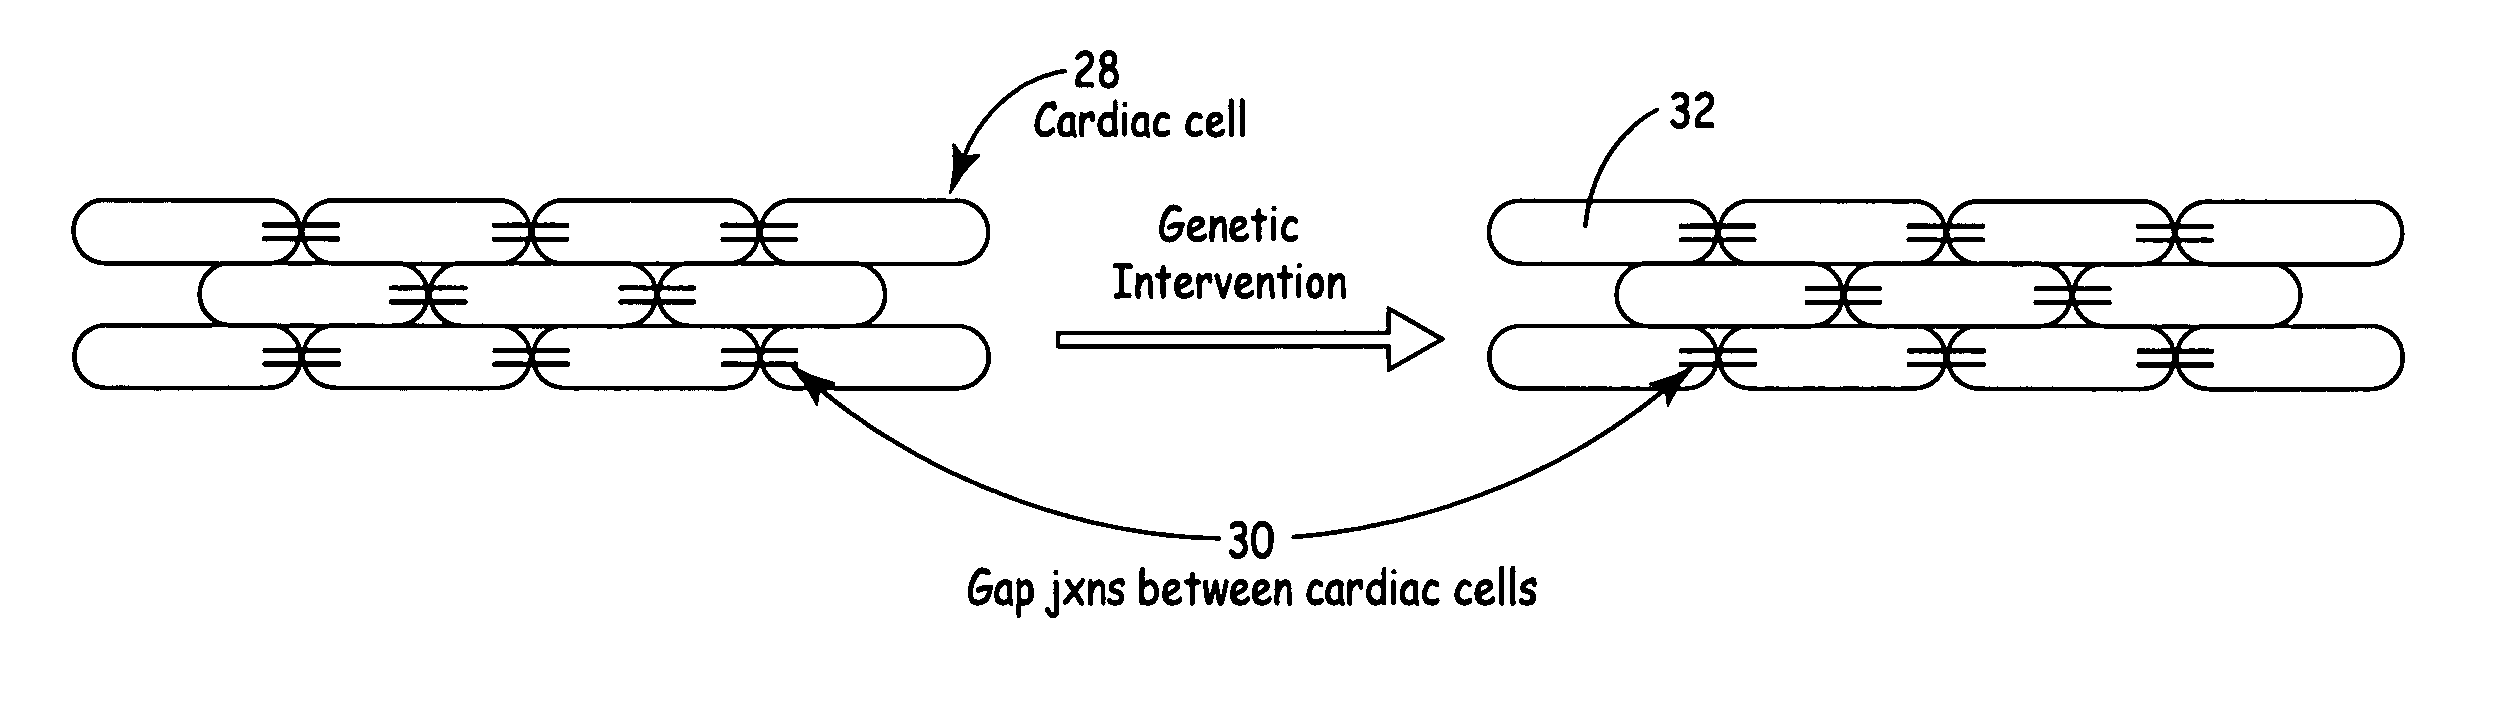 Cellular and genetic intervention to treat ventricular tachycardia